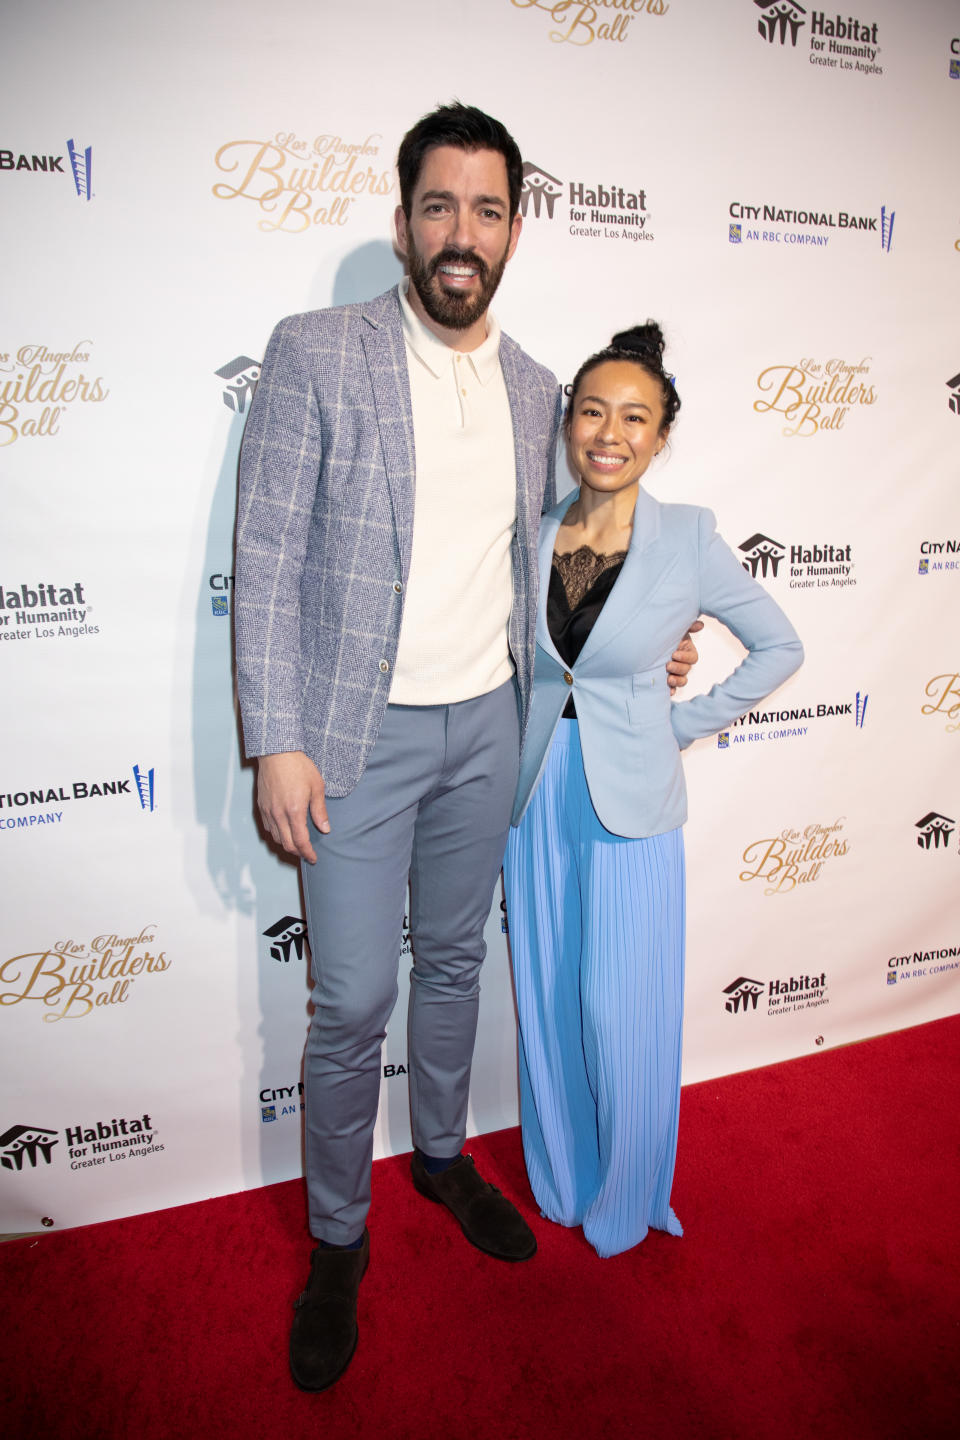 BEVERLY HILLS, CALIFORNIA - MARCH 08: Drew Scott and Linda Phan walk the red carpet for Habitat LA's 2023 Los Angeles Builders Ball at The Beverly Hilton on March 08, 2023 in Beverly Hills, California. (Photo by Ella Hovsepian/Getty Images)